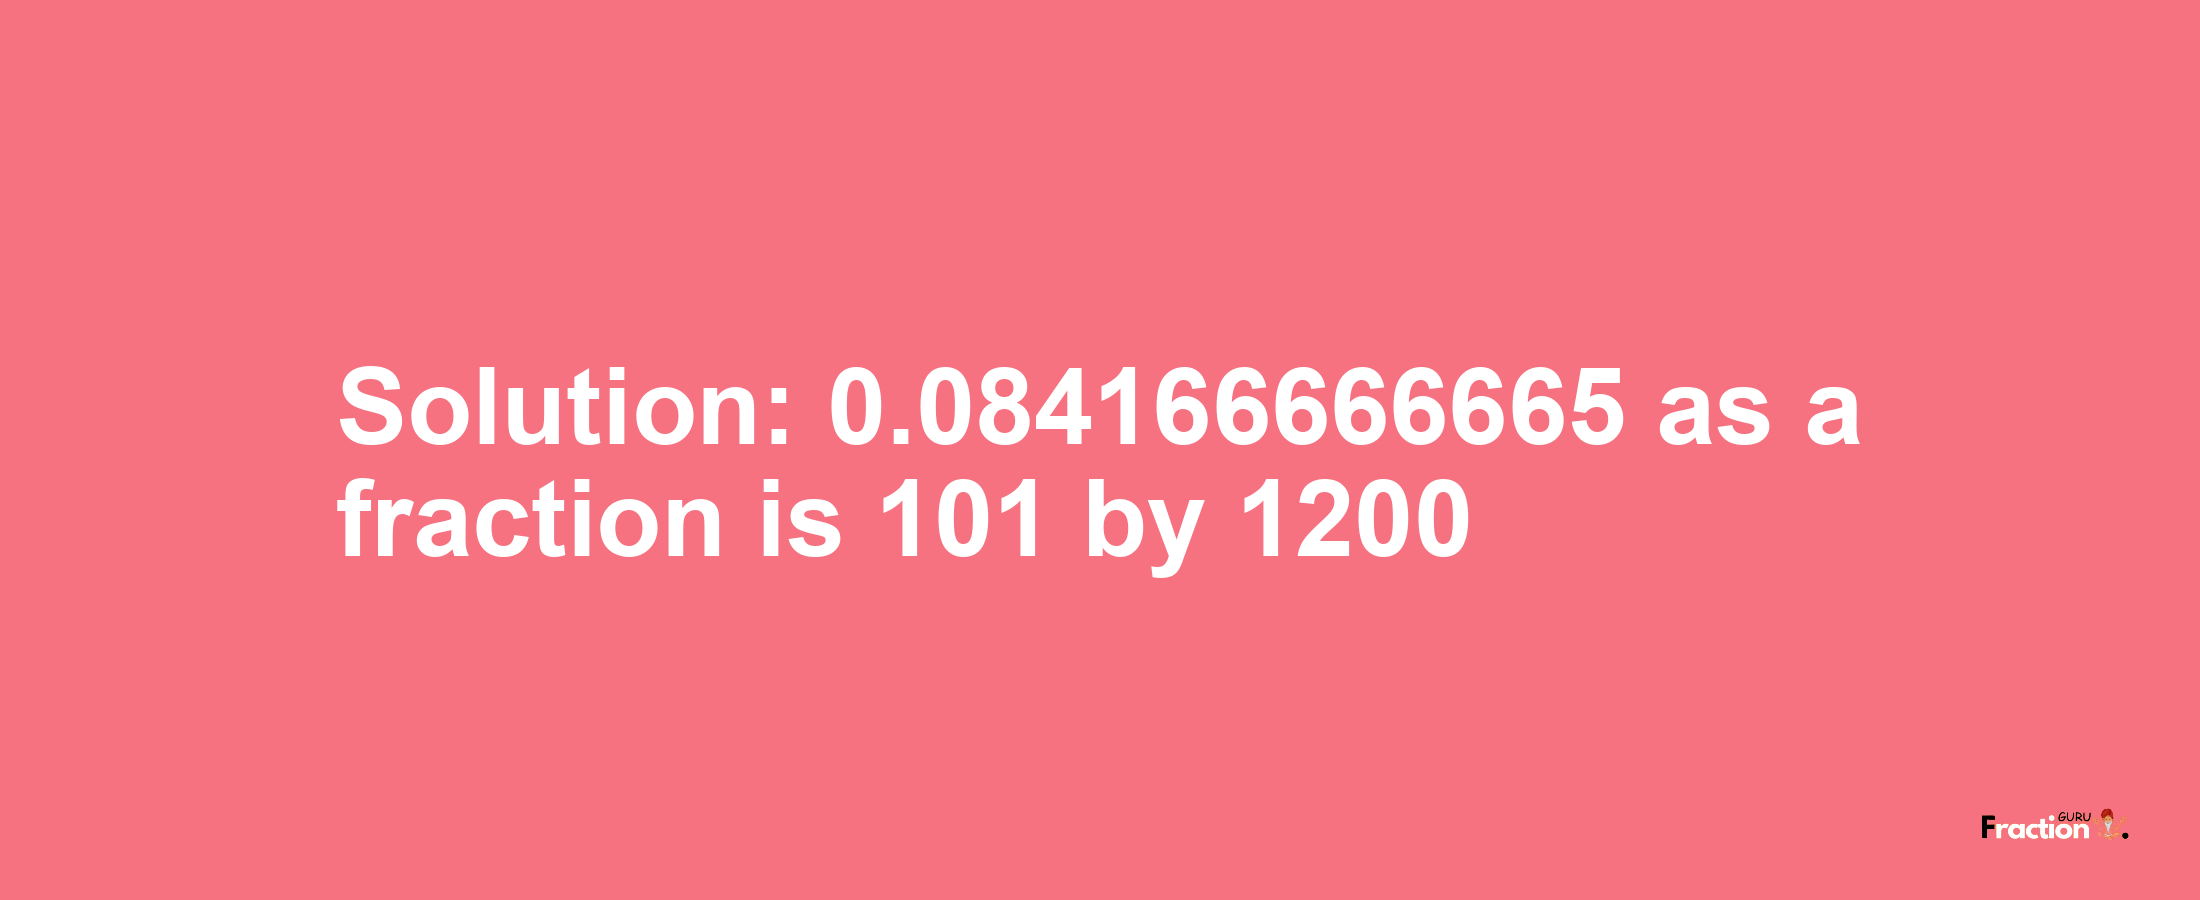 Solution:0.084166666665 as a fraction is 101/1200